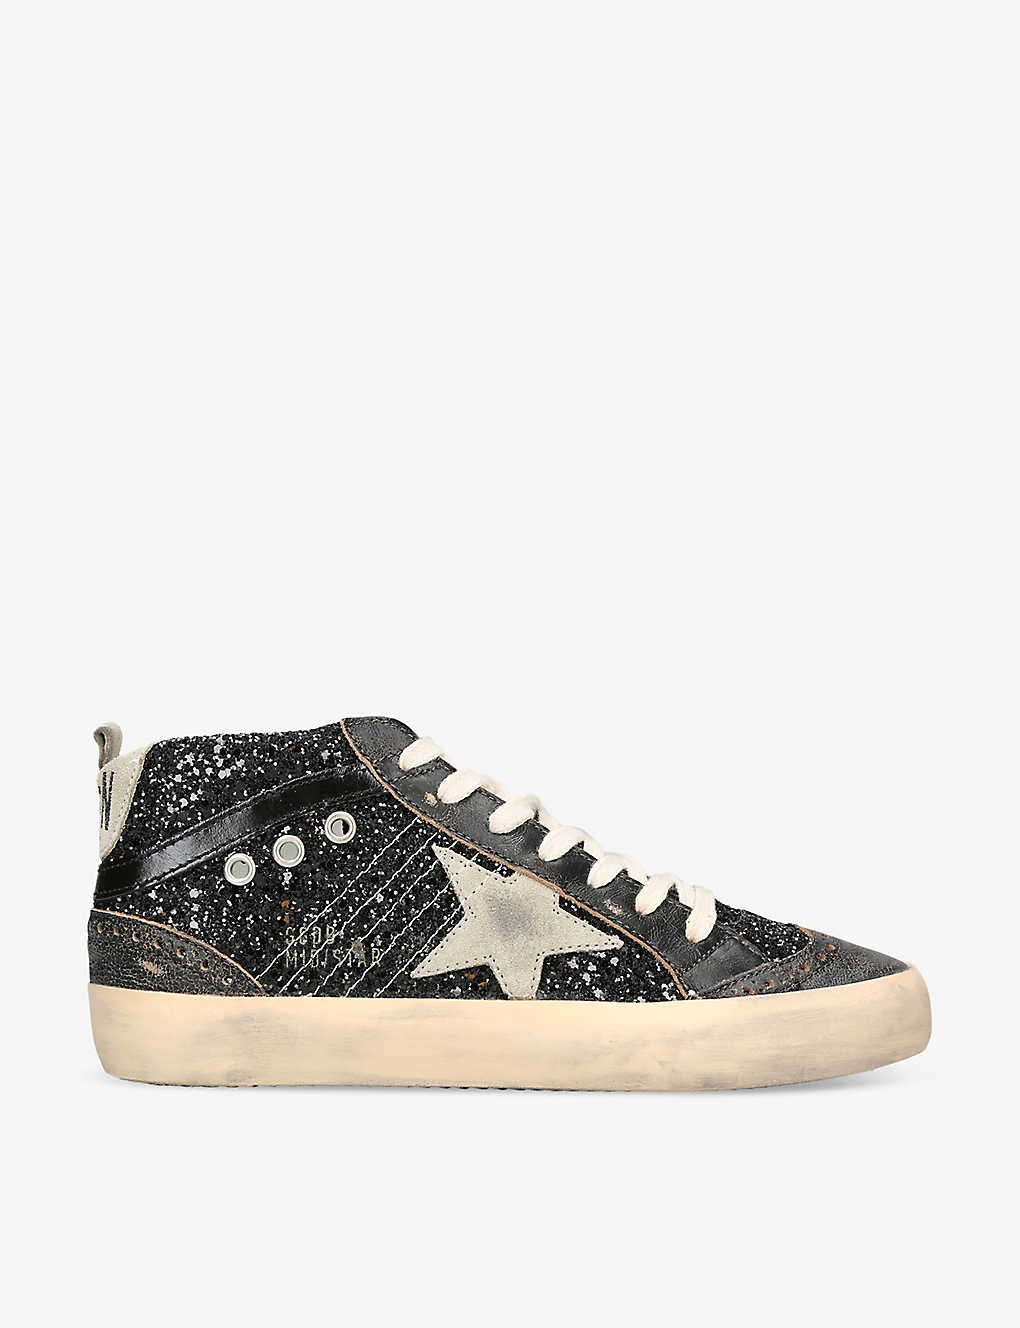 Shop Golden Goose Women's Black/comb Mid Star 90365 Glitter-embellished Leather Mid-top Trainers